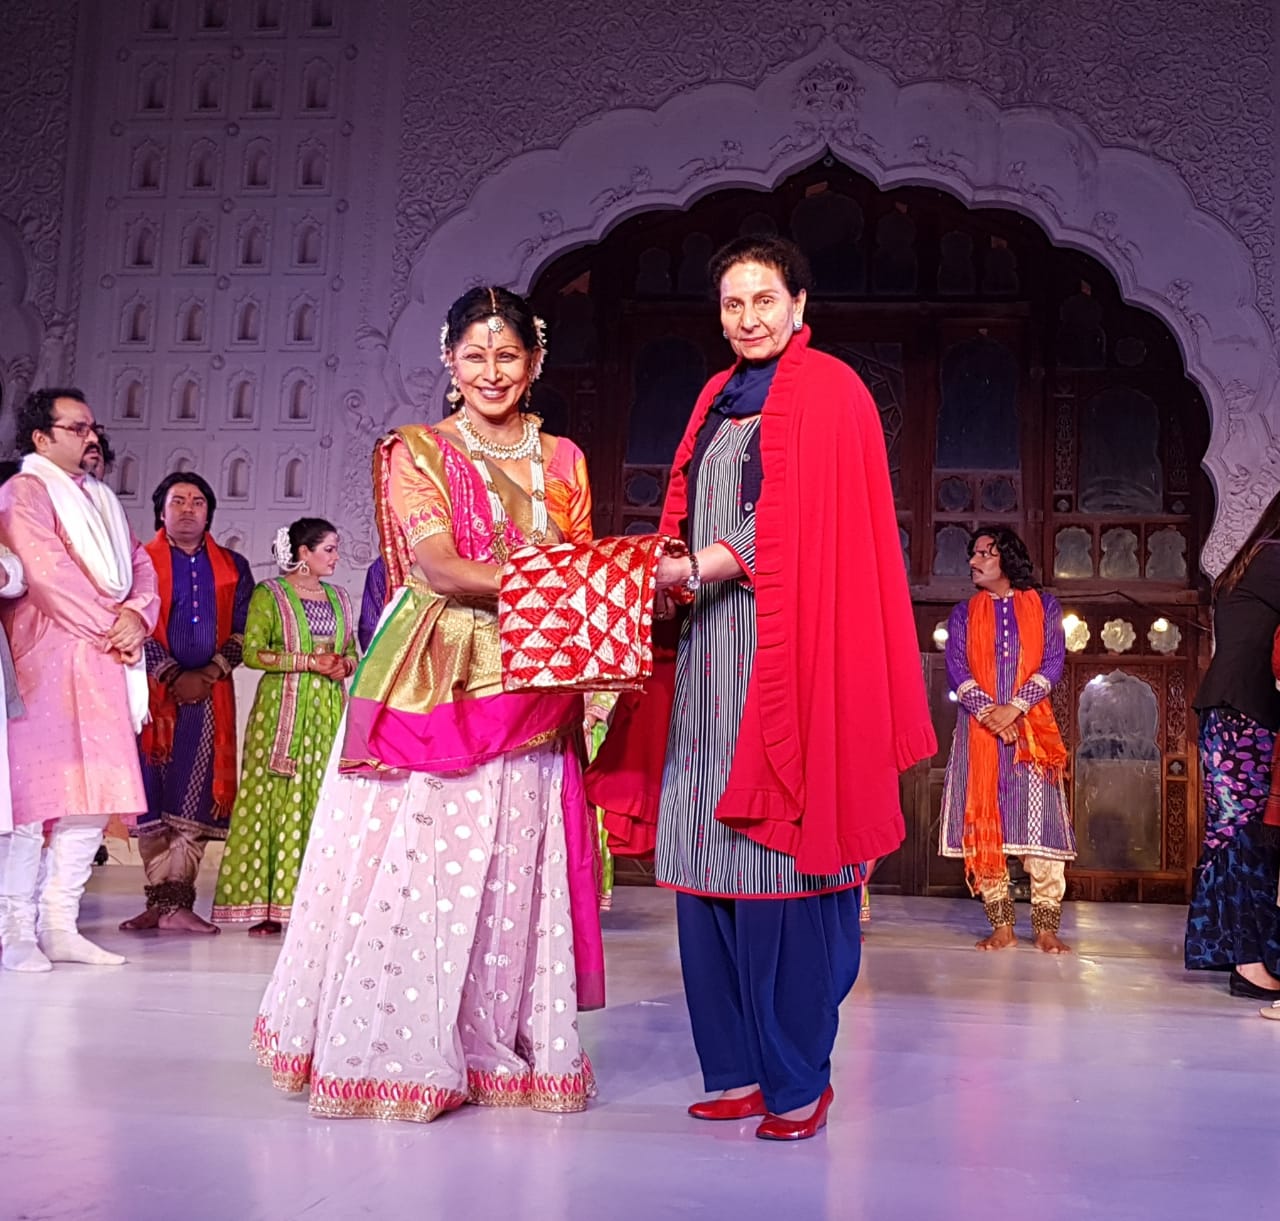 Patiala Heritage Festival;third evening of Classical Music holds art & music connoisseurs spellbound